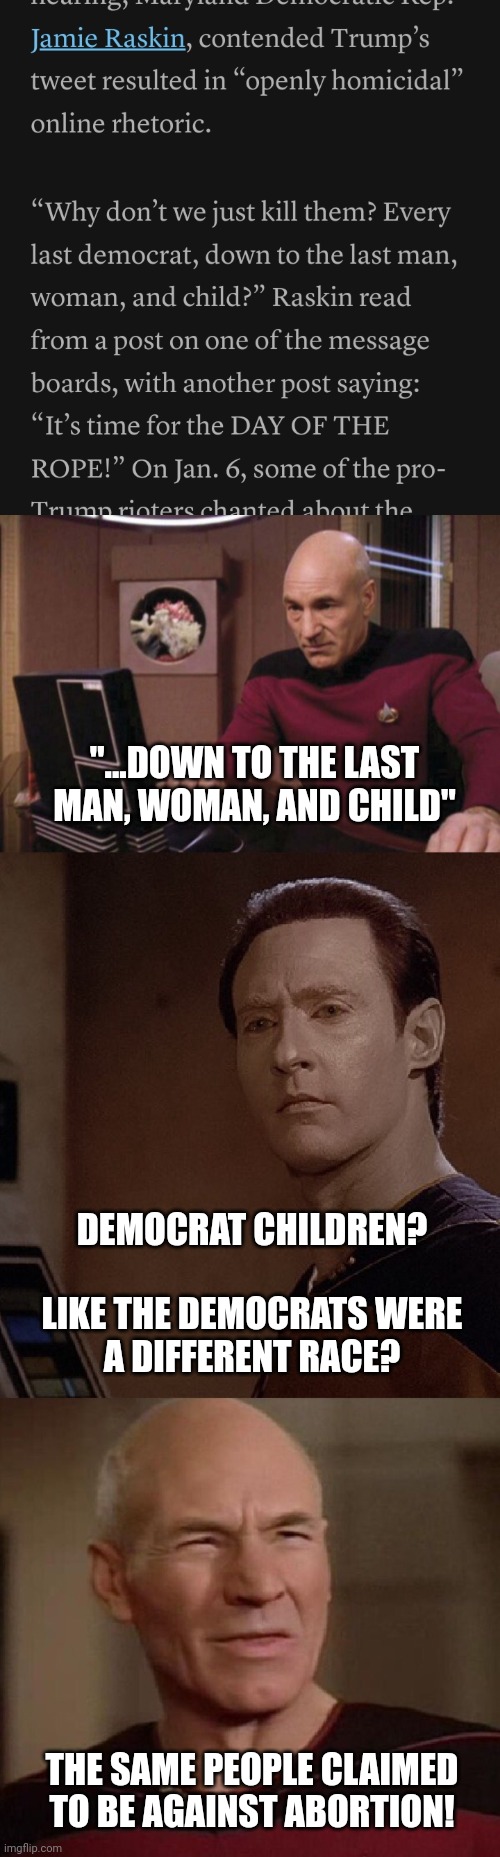 Picard teaches Data a history lesson about American fascists | "...DOWN TO THE LAST MAN, WOMAN, AND CHILD"; DEMOCRAT CHILDREN?
 
LIKE THE DEMOCRATS WERE A DIFFERENT RACE? THE SAME PEOPLE CLAIMED TO BE AGAINST ABORTION! | image tagged in picard and data wtf,maga,violent right,genocide,democrats,trumpist hypocrisy | made w/ Imgflip meme maker